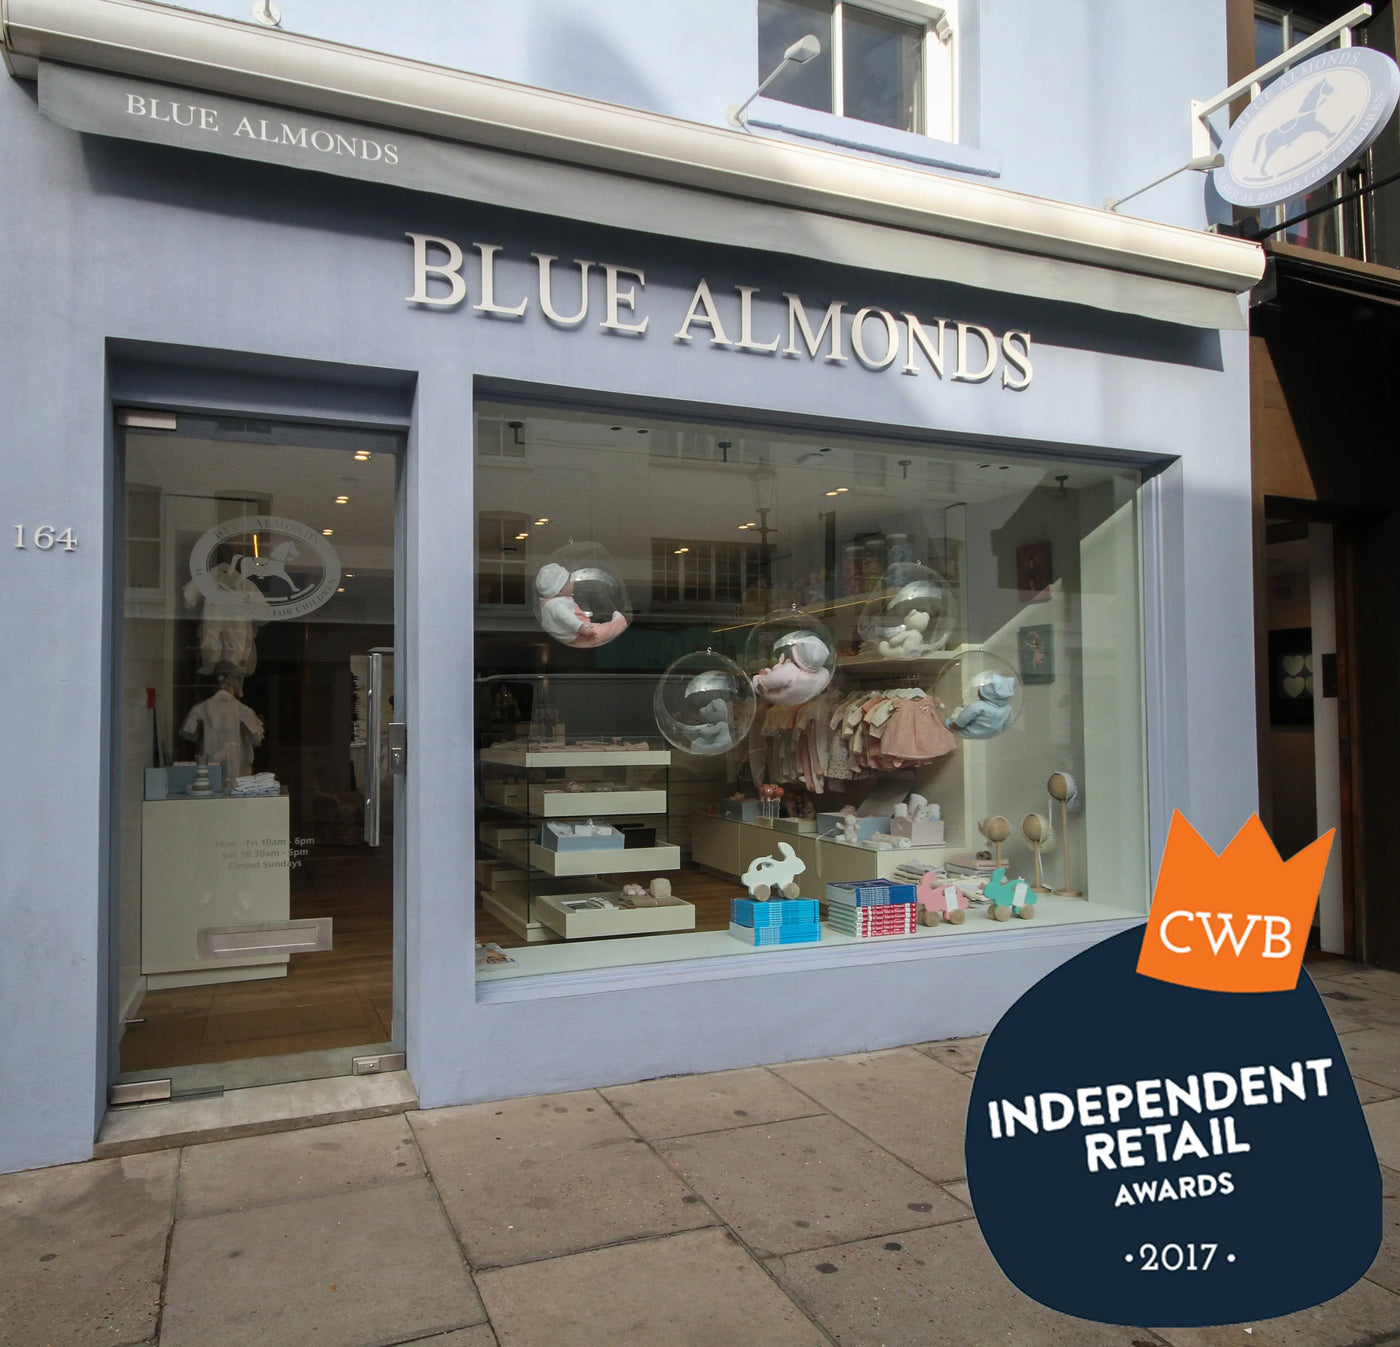 Blue Almonds ‘Best Baby Store’ in CWB Independent Retail Awards 2017 Blue Almonds Ltd